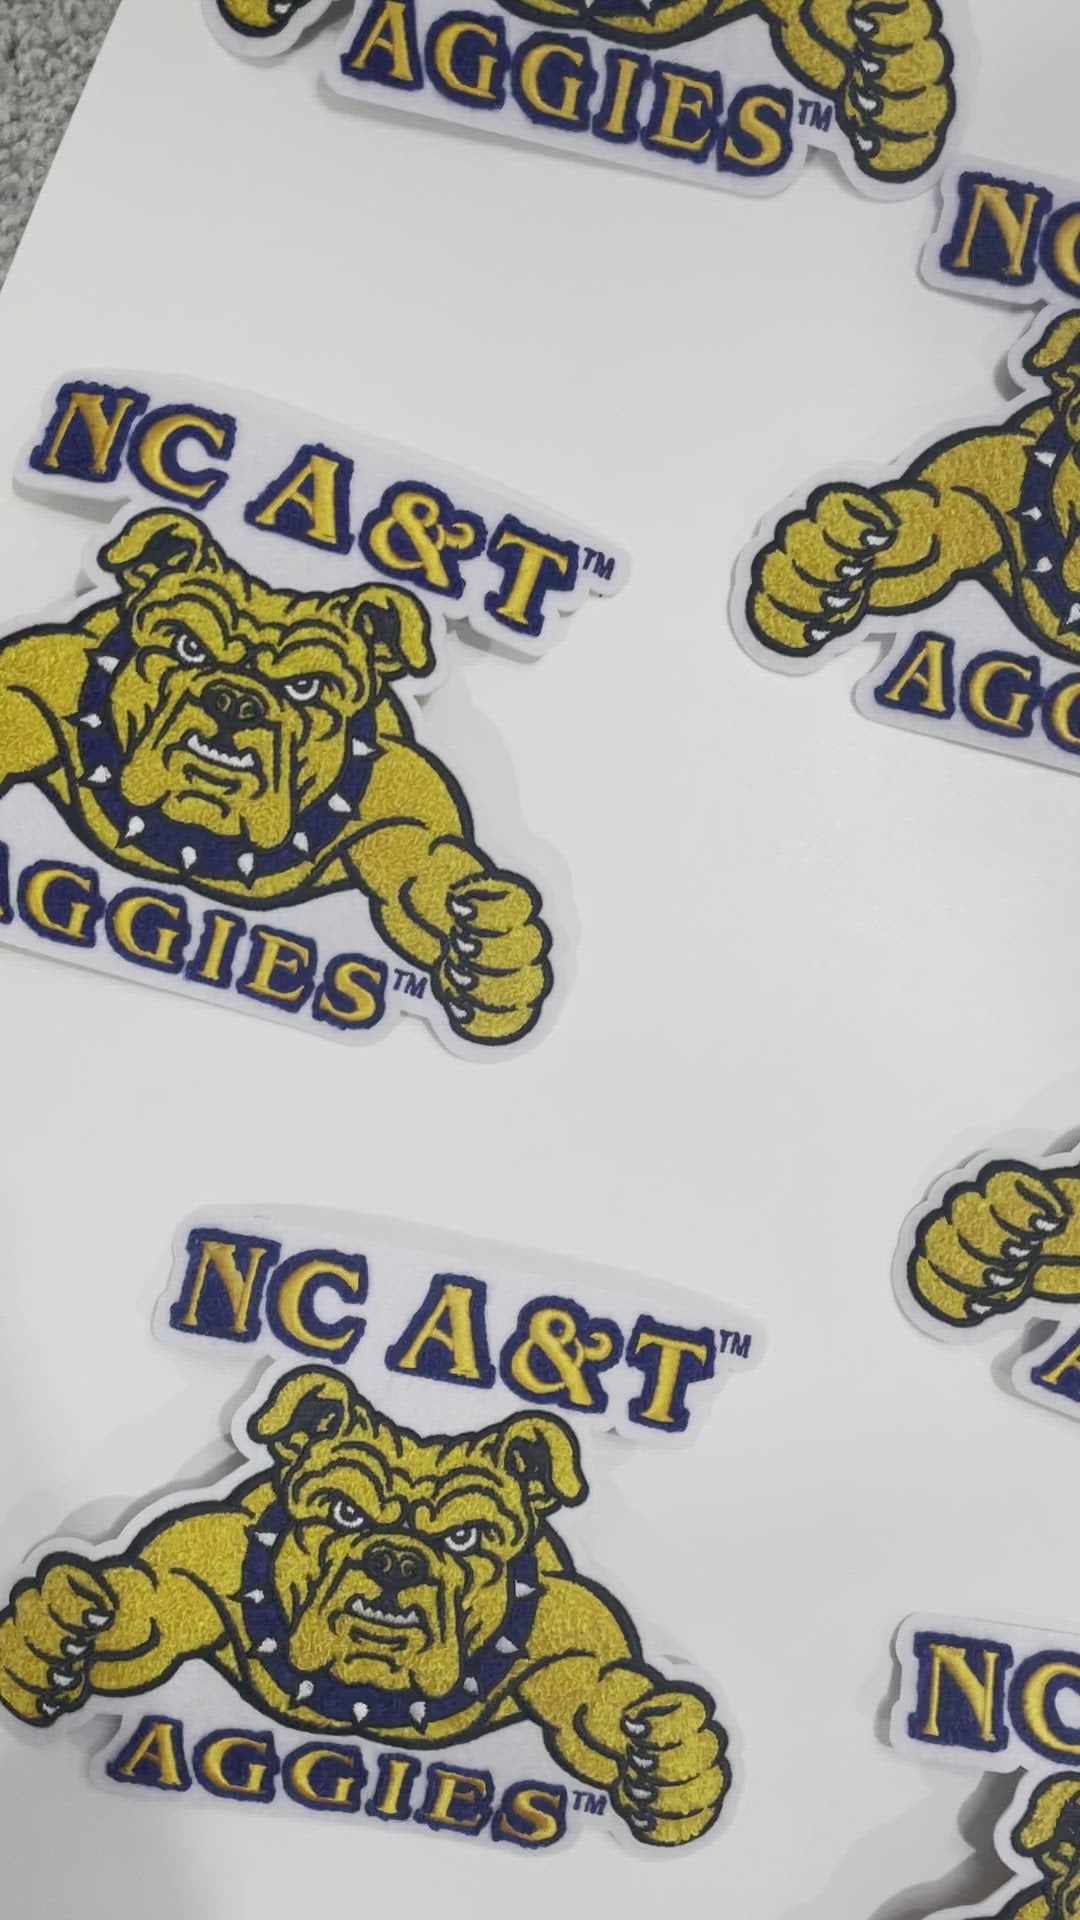 NCAT AGGIE Sew-on patches